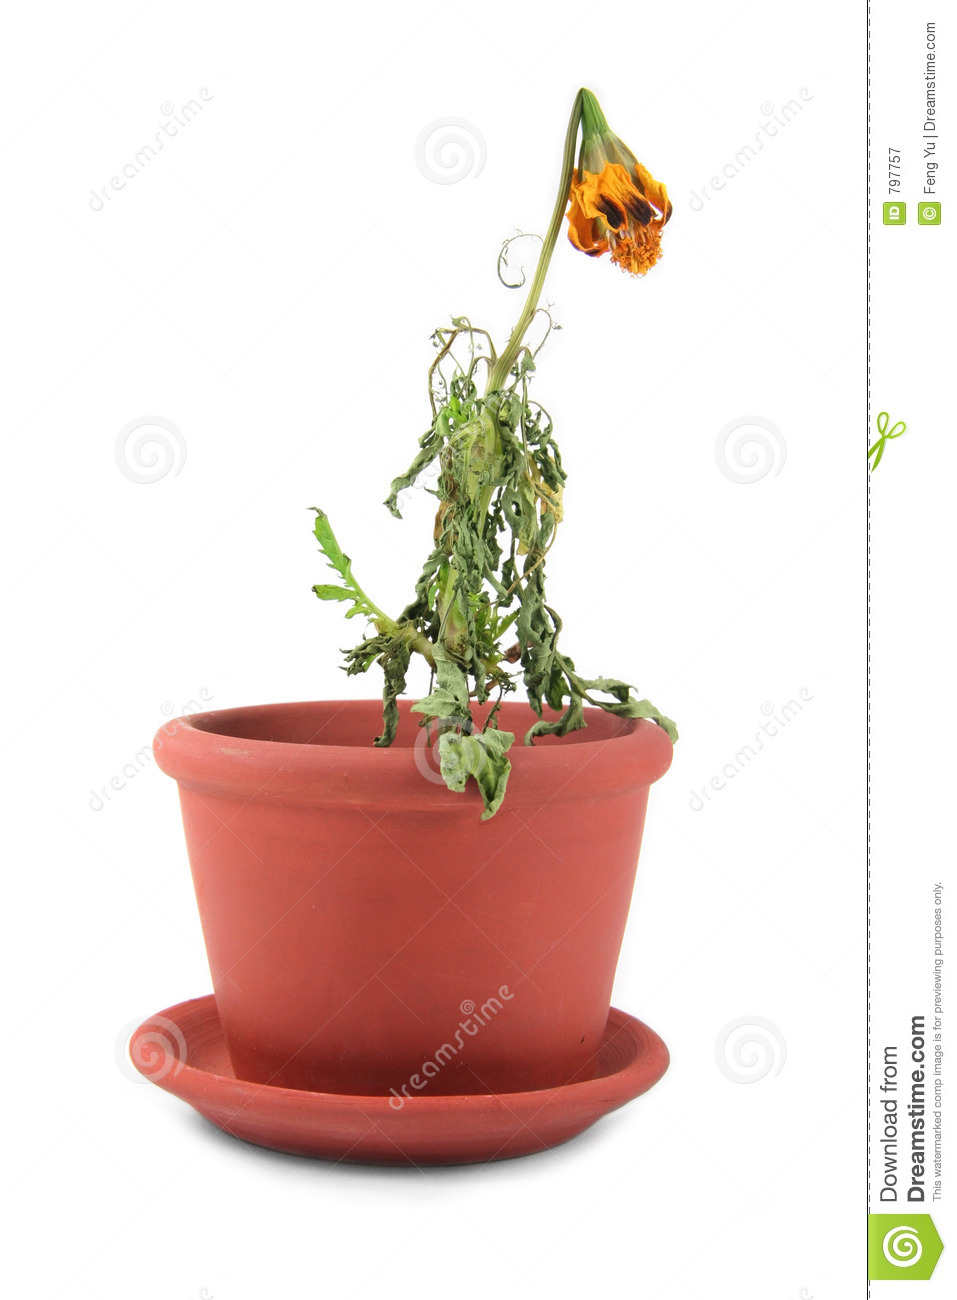 Dead Flower Royalty Free Stock Photography   Image  797757